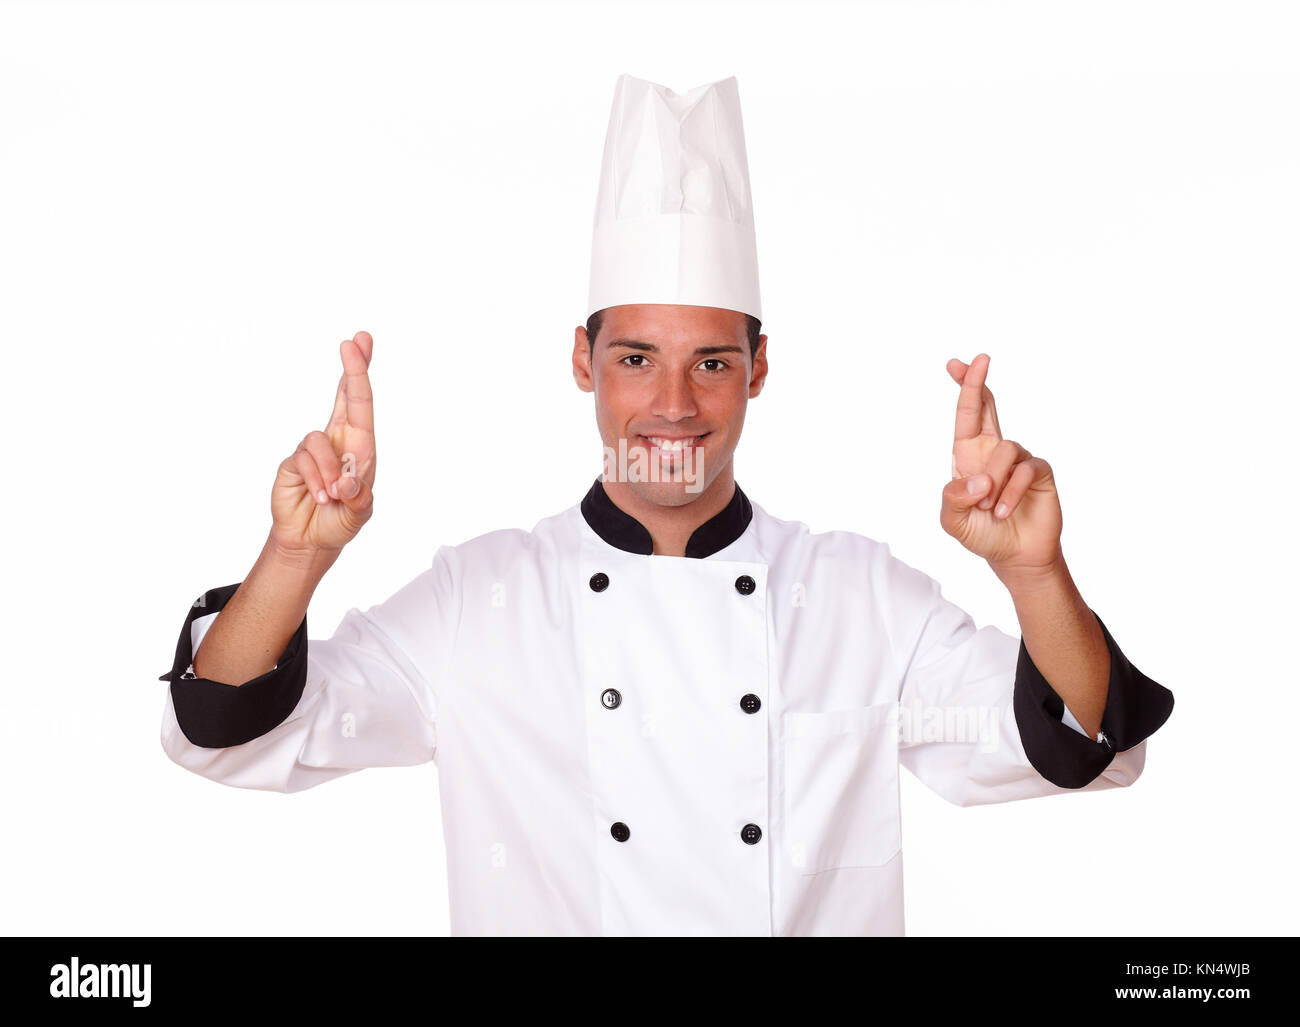 Portrait of handsome 20-24 years young chef on white uniform crossing his fingers while smiling at you on isolated studio. Stock Photo